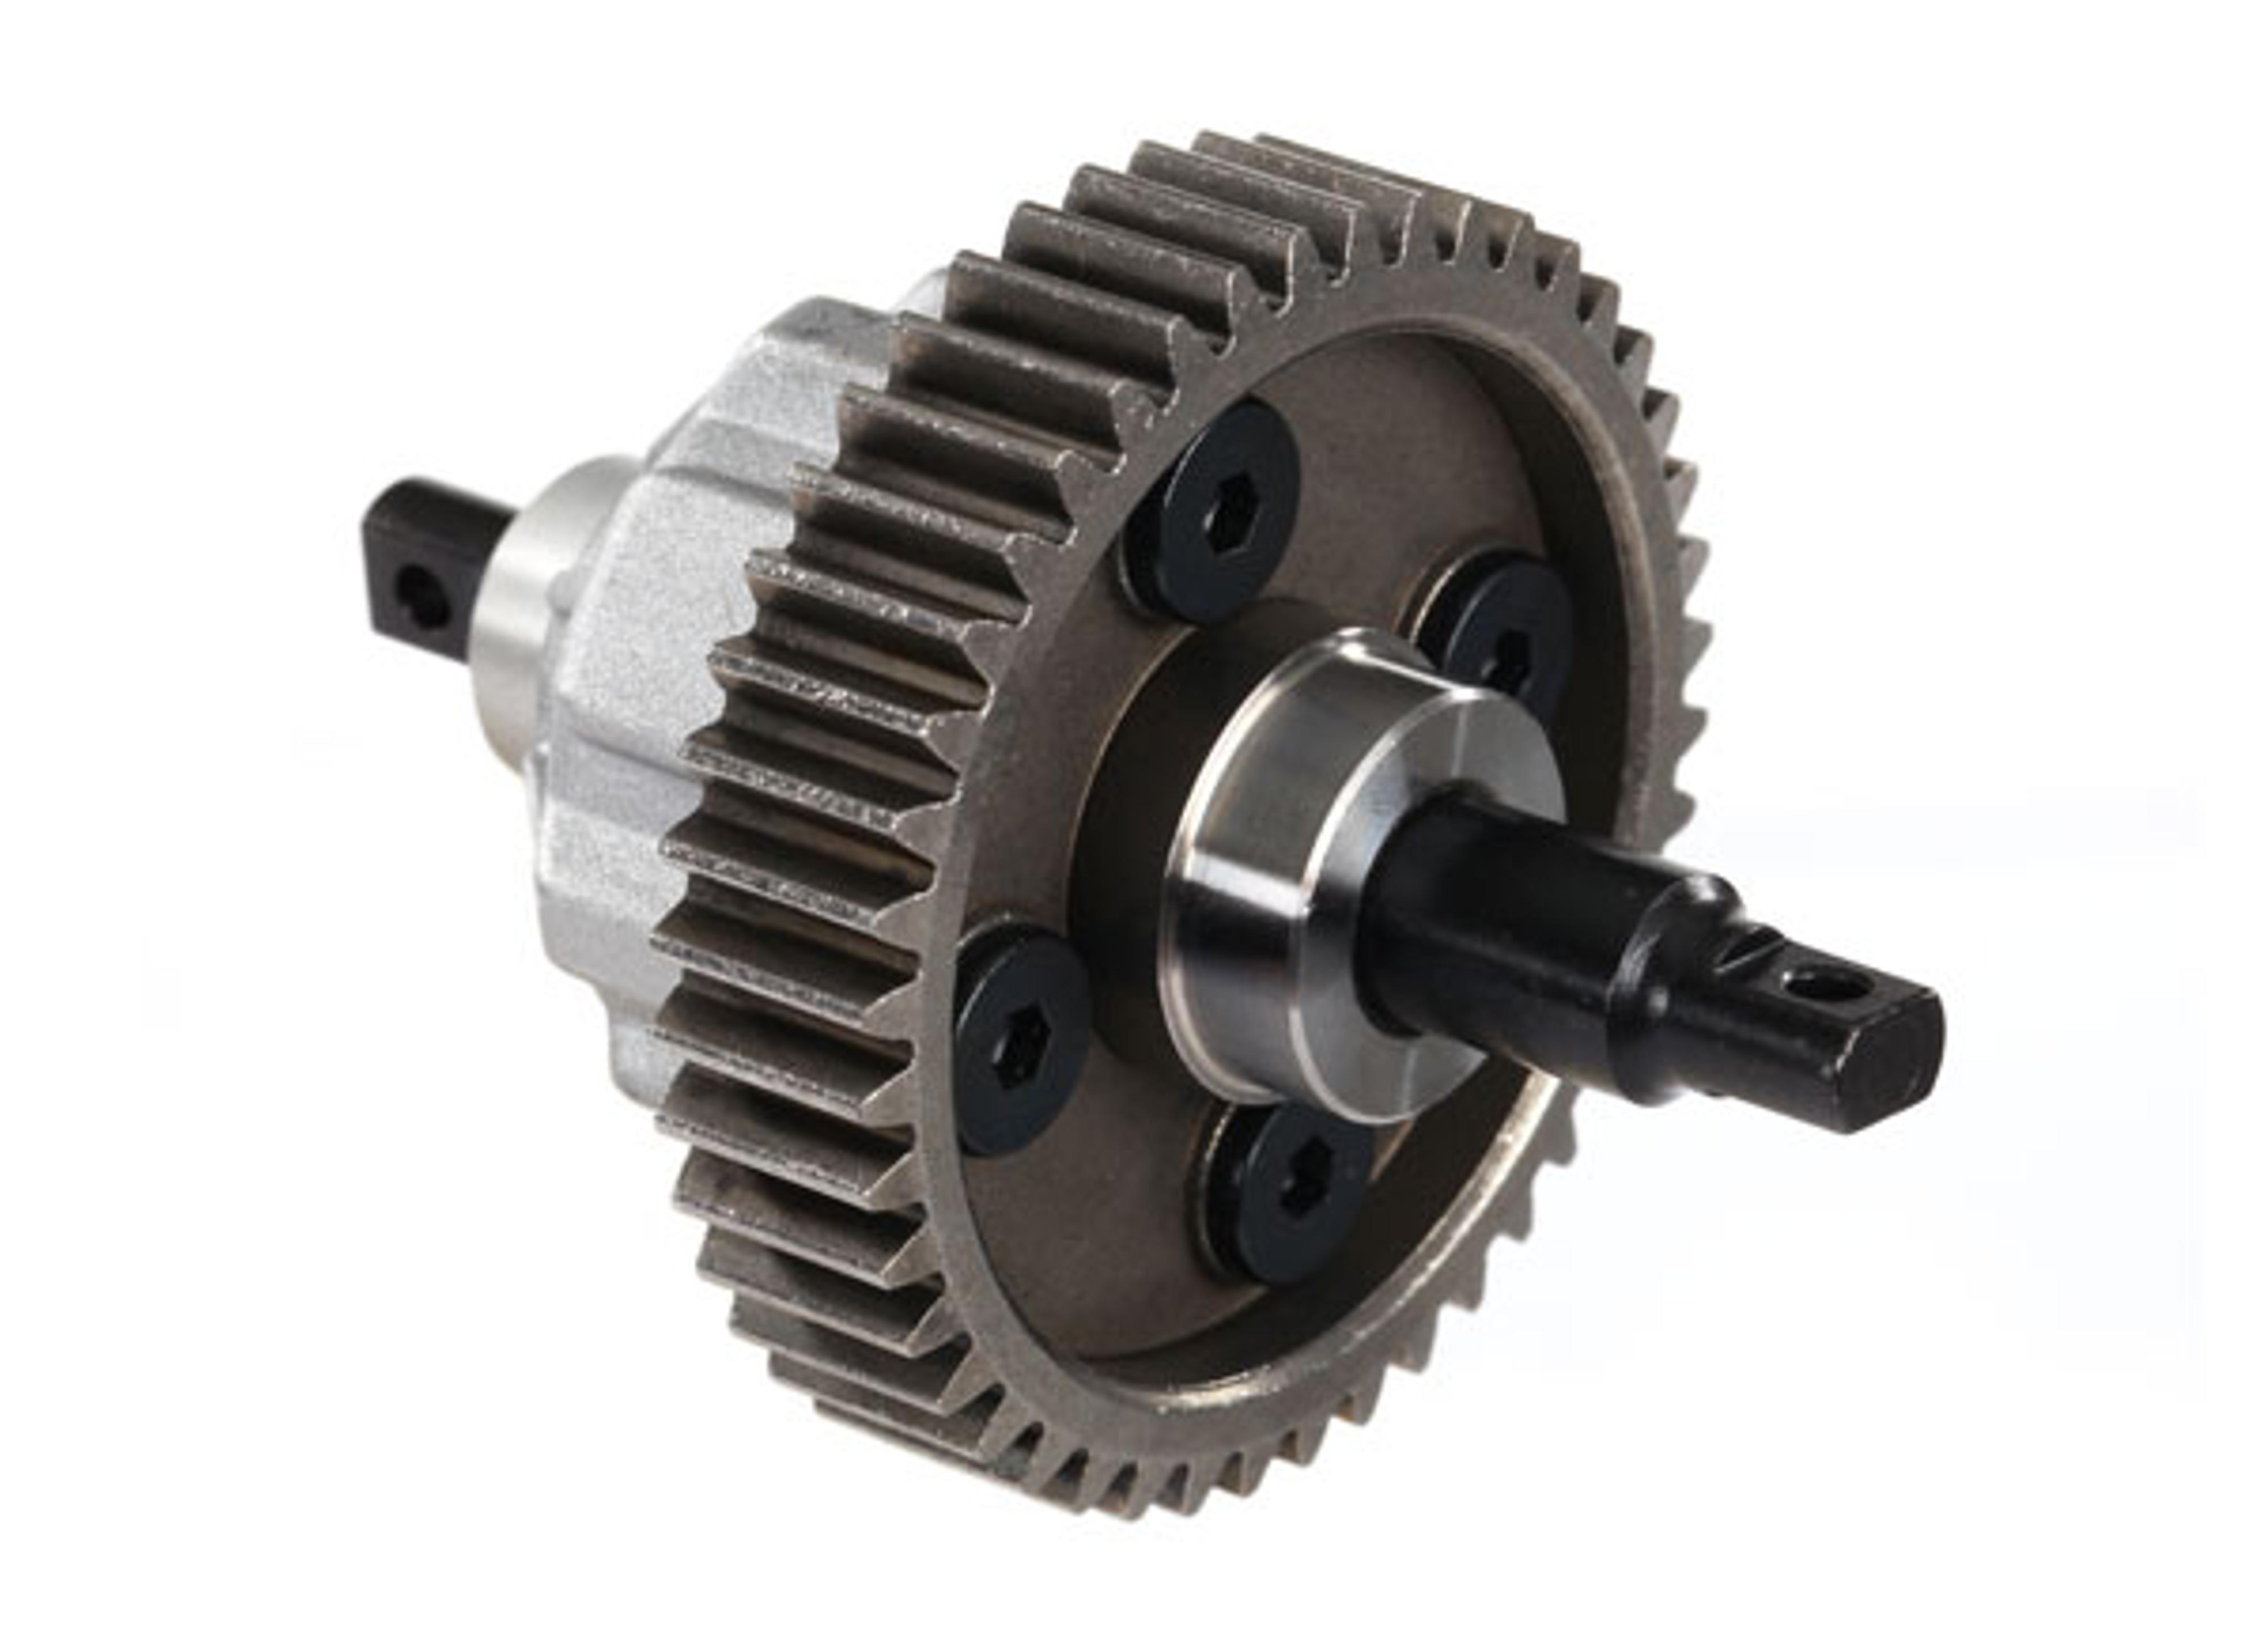 Traxxas Central Differential Kit (Maxx)